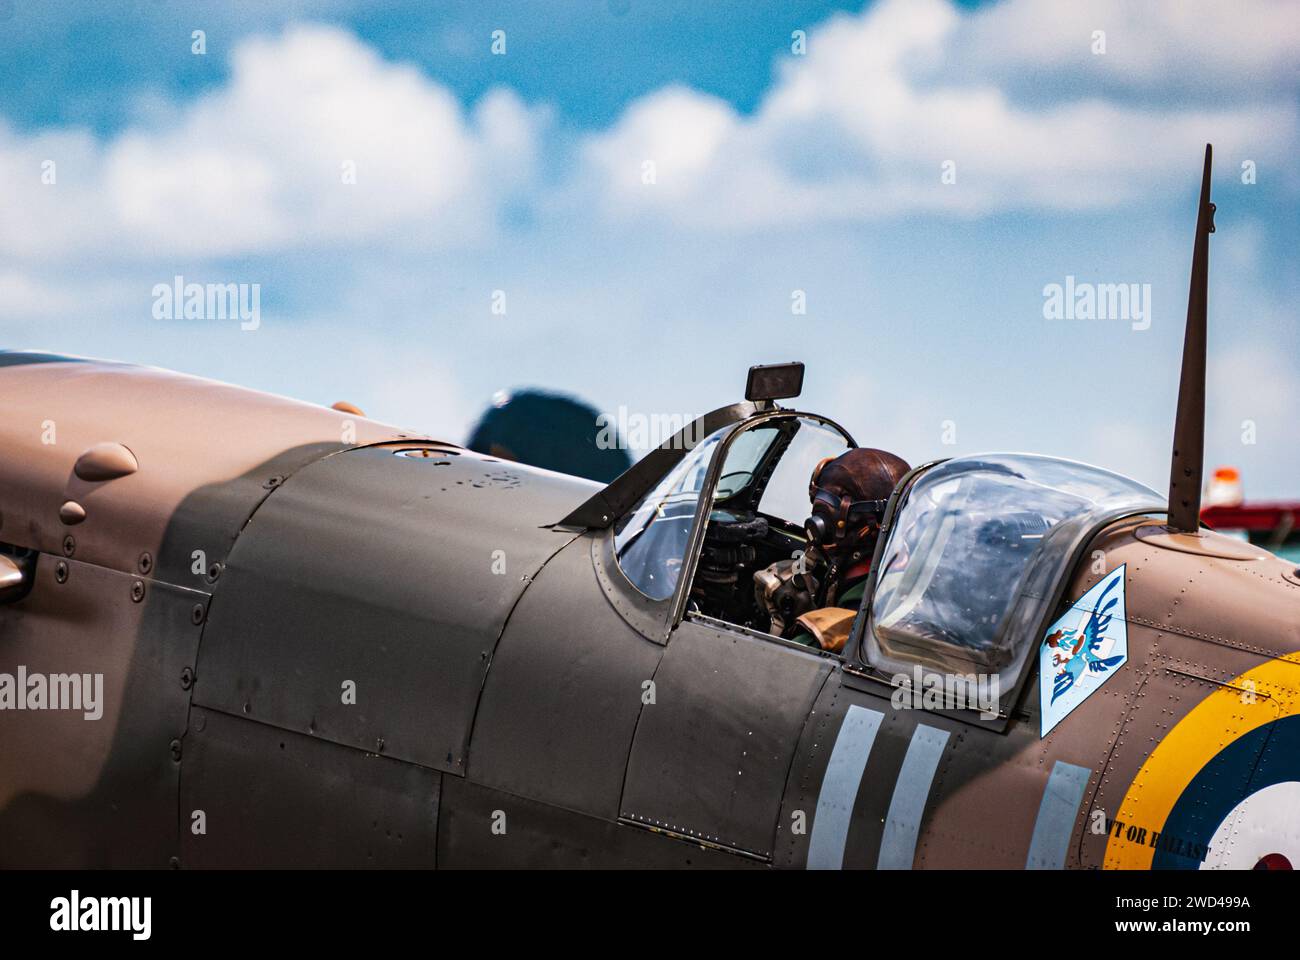 Cockpit of a spitfire fighter plane from WW2 Stock Photo